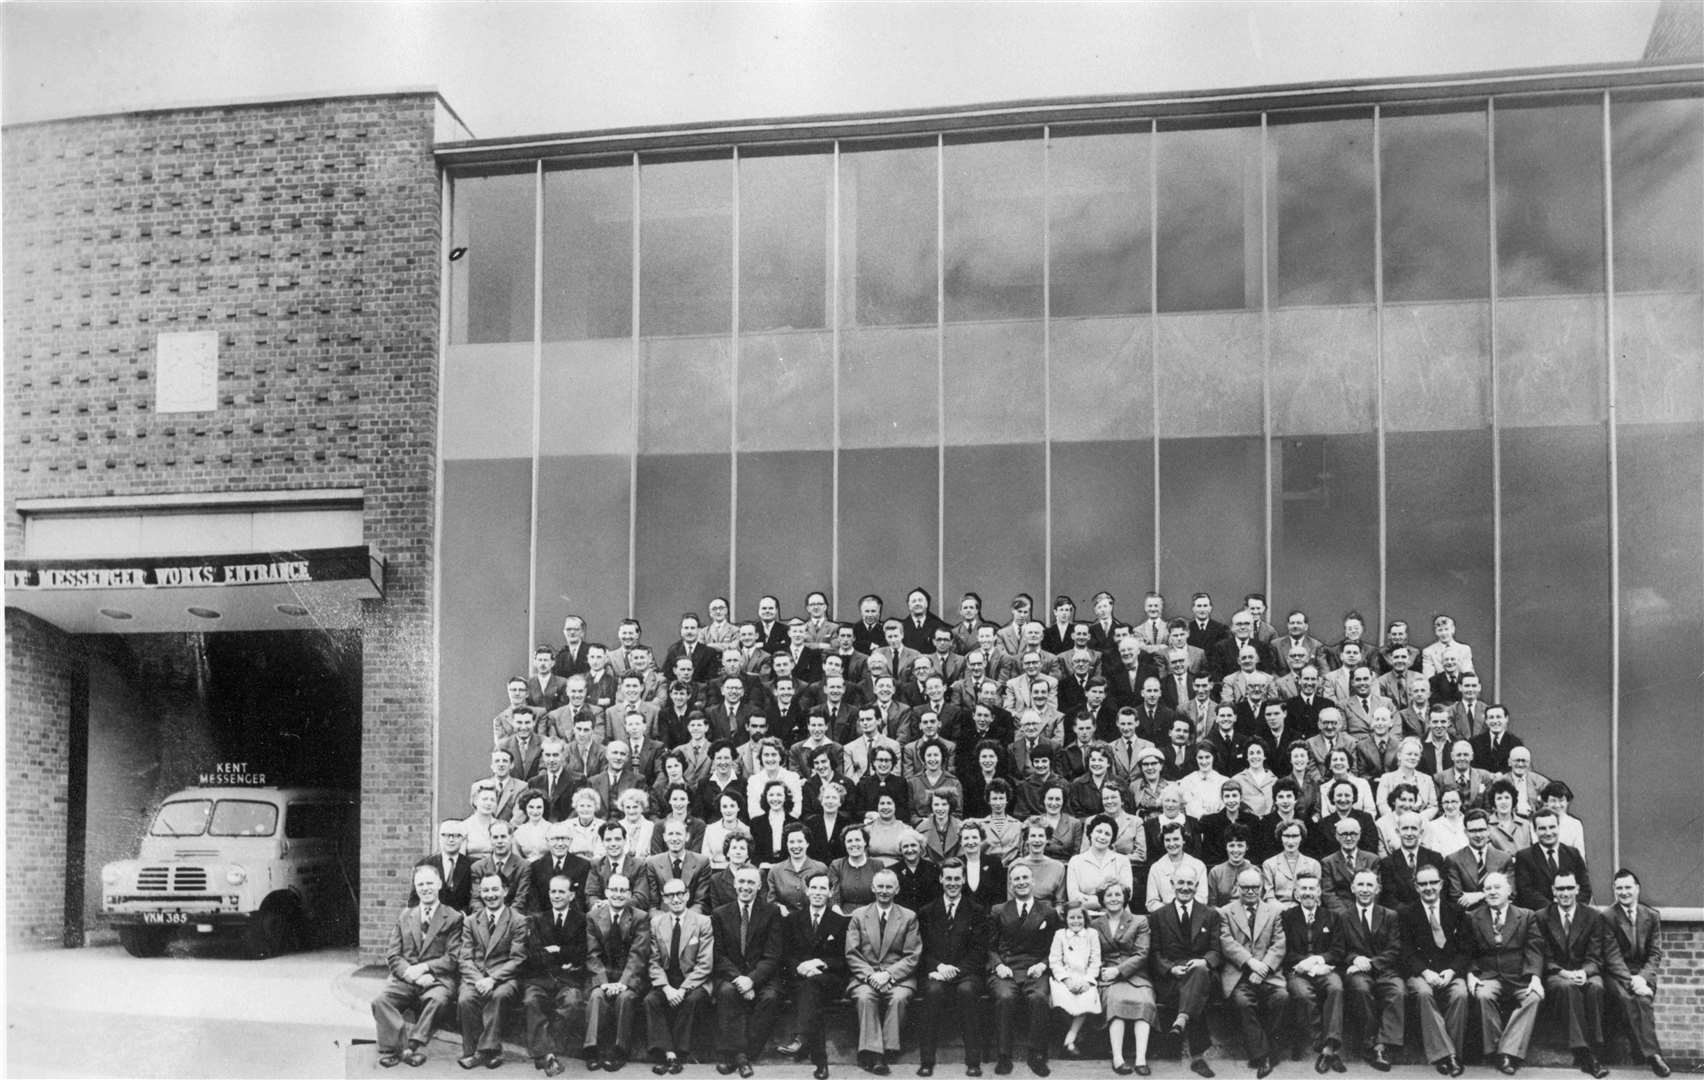 Members of staff of the Kent Messenger Group outside its new premises in Station Road, Maidstone, in 1958